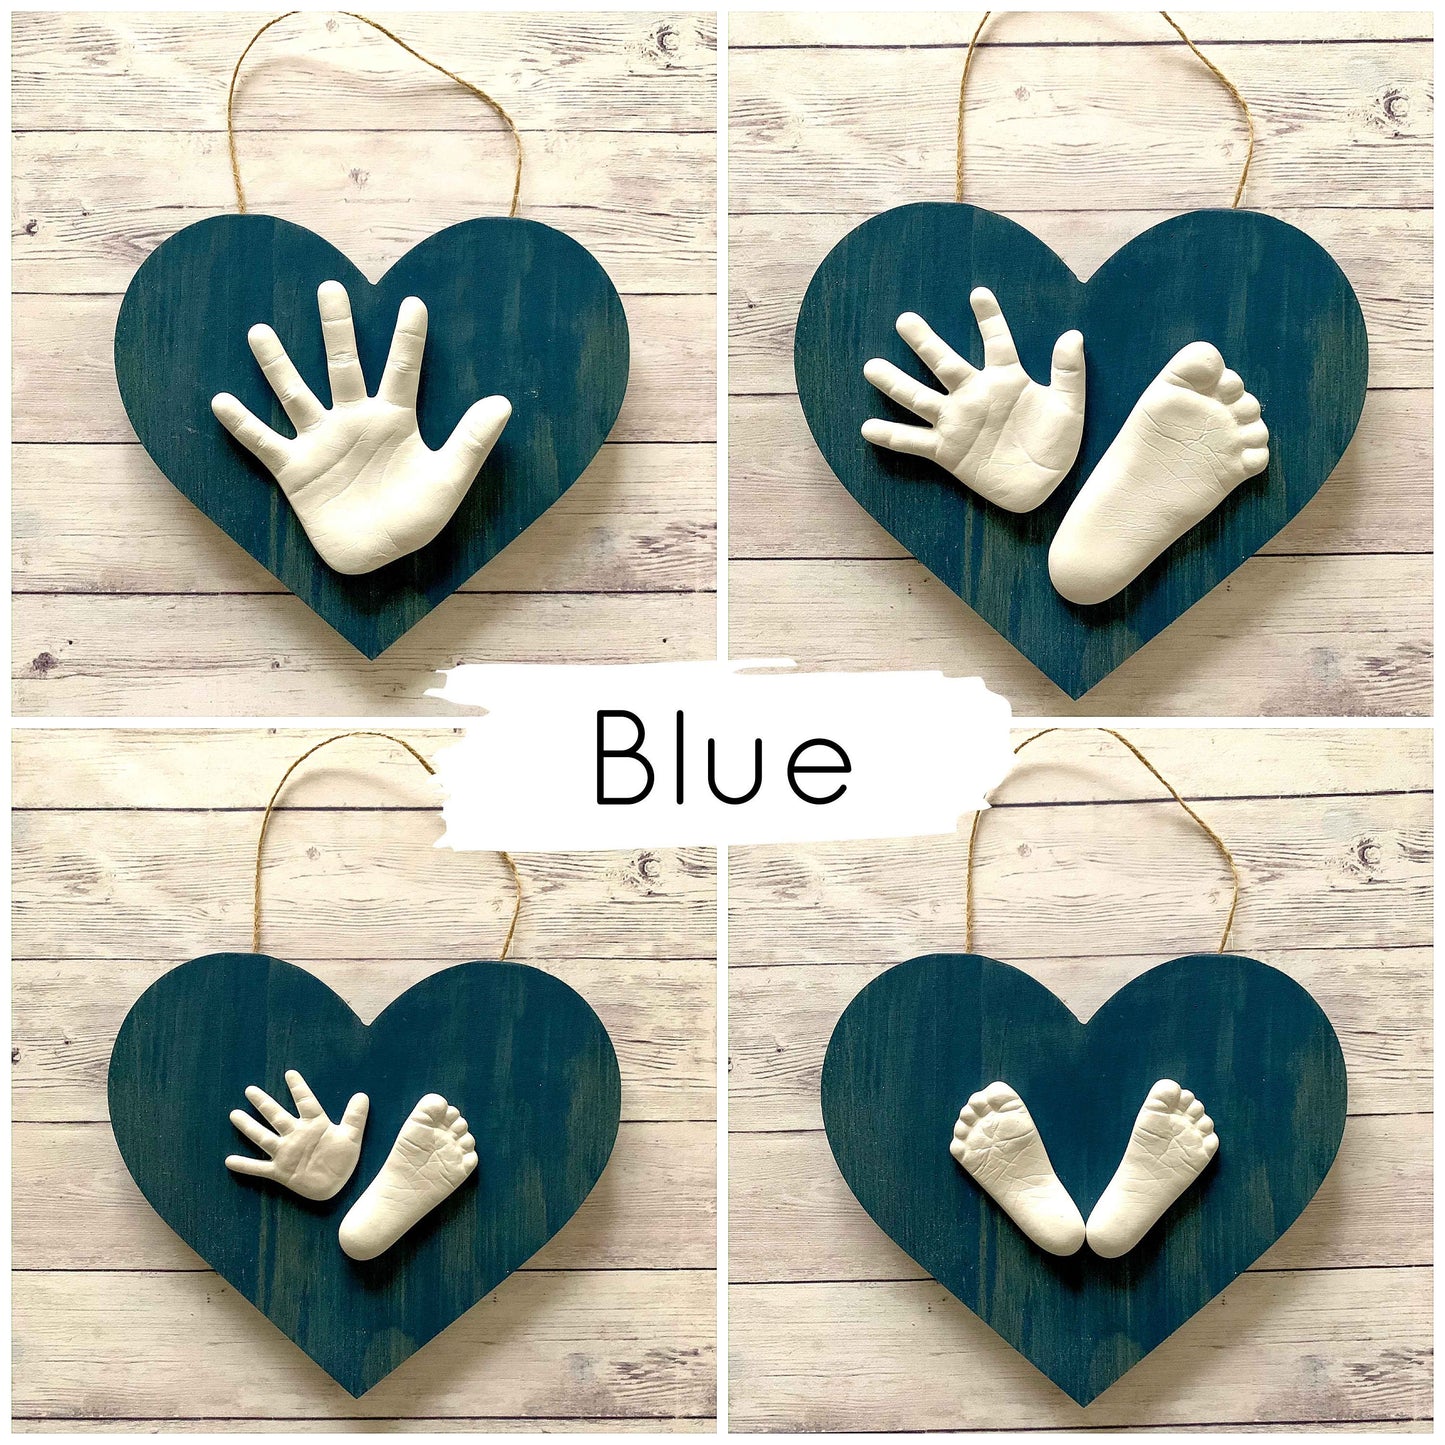 9" wooden heart plaque casting kit for baby 0-24 months